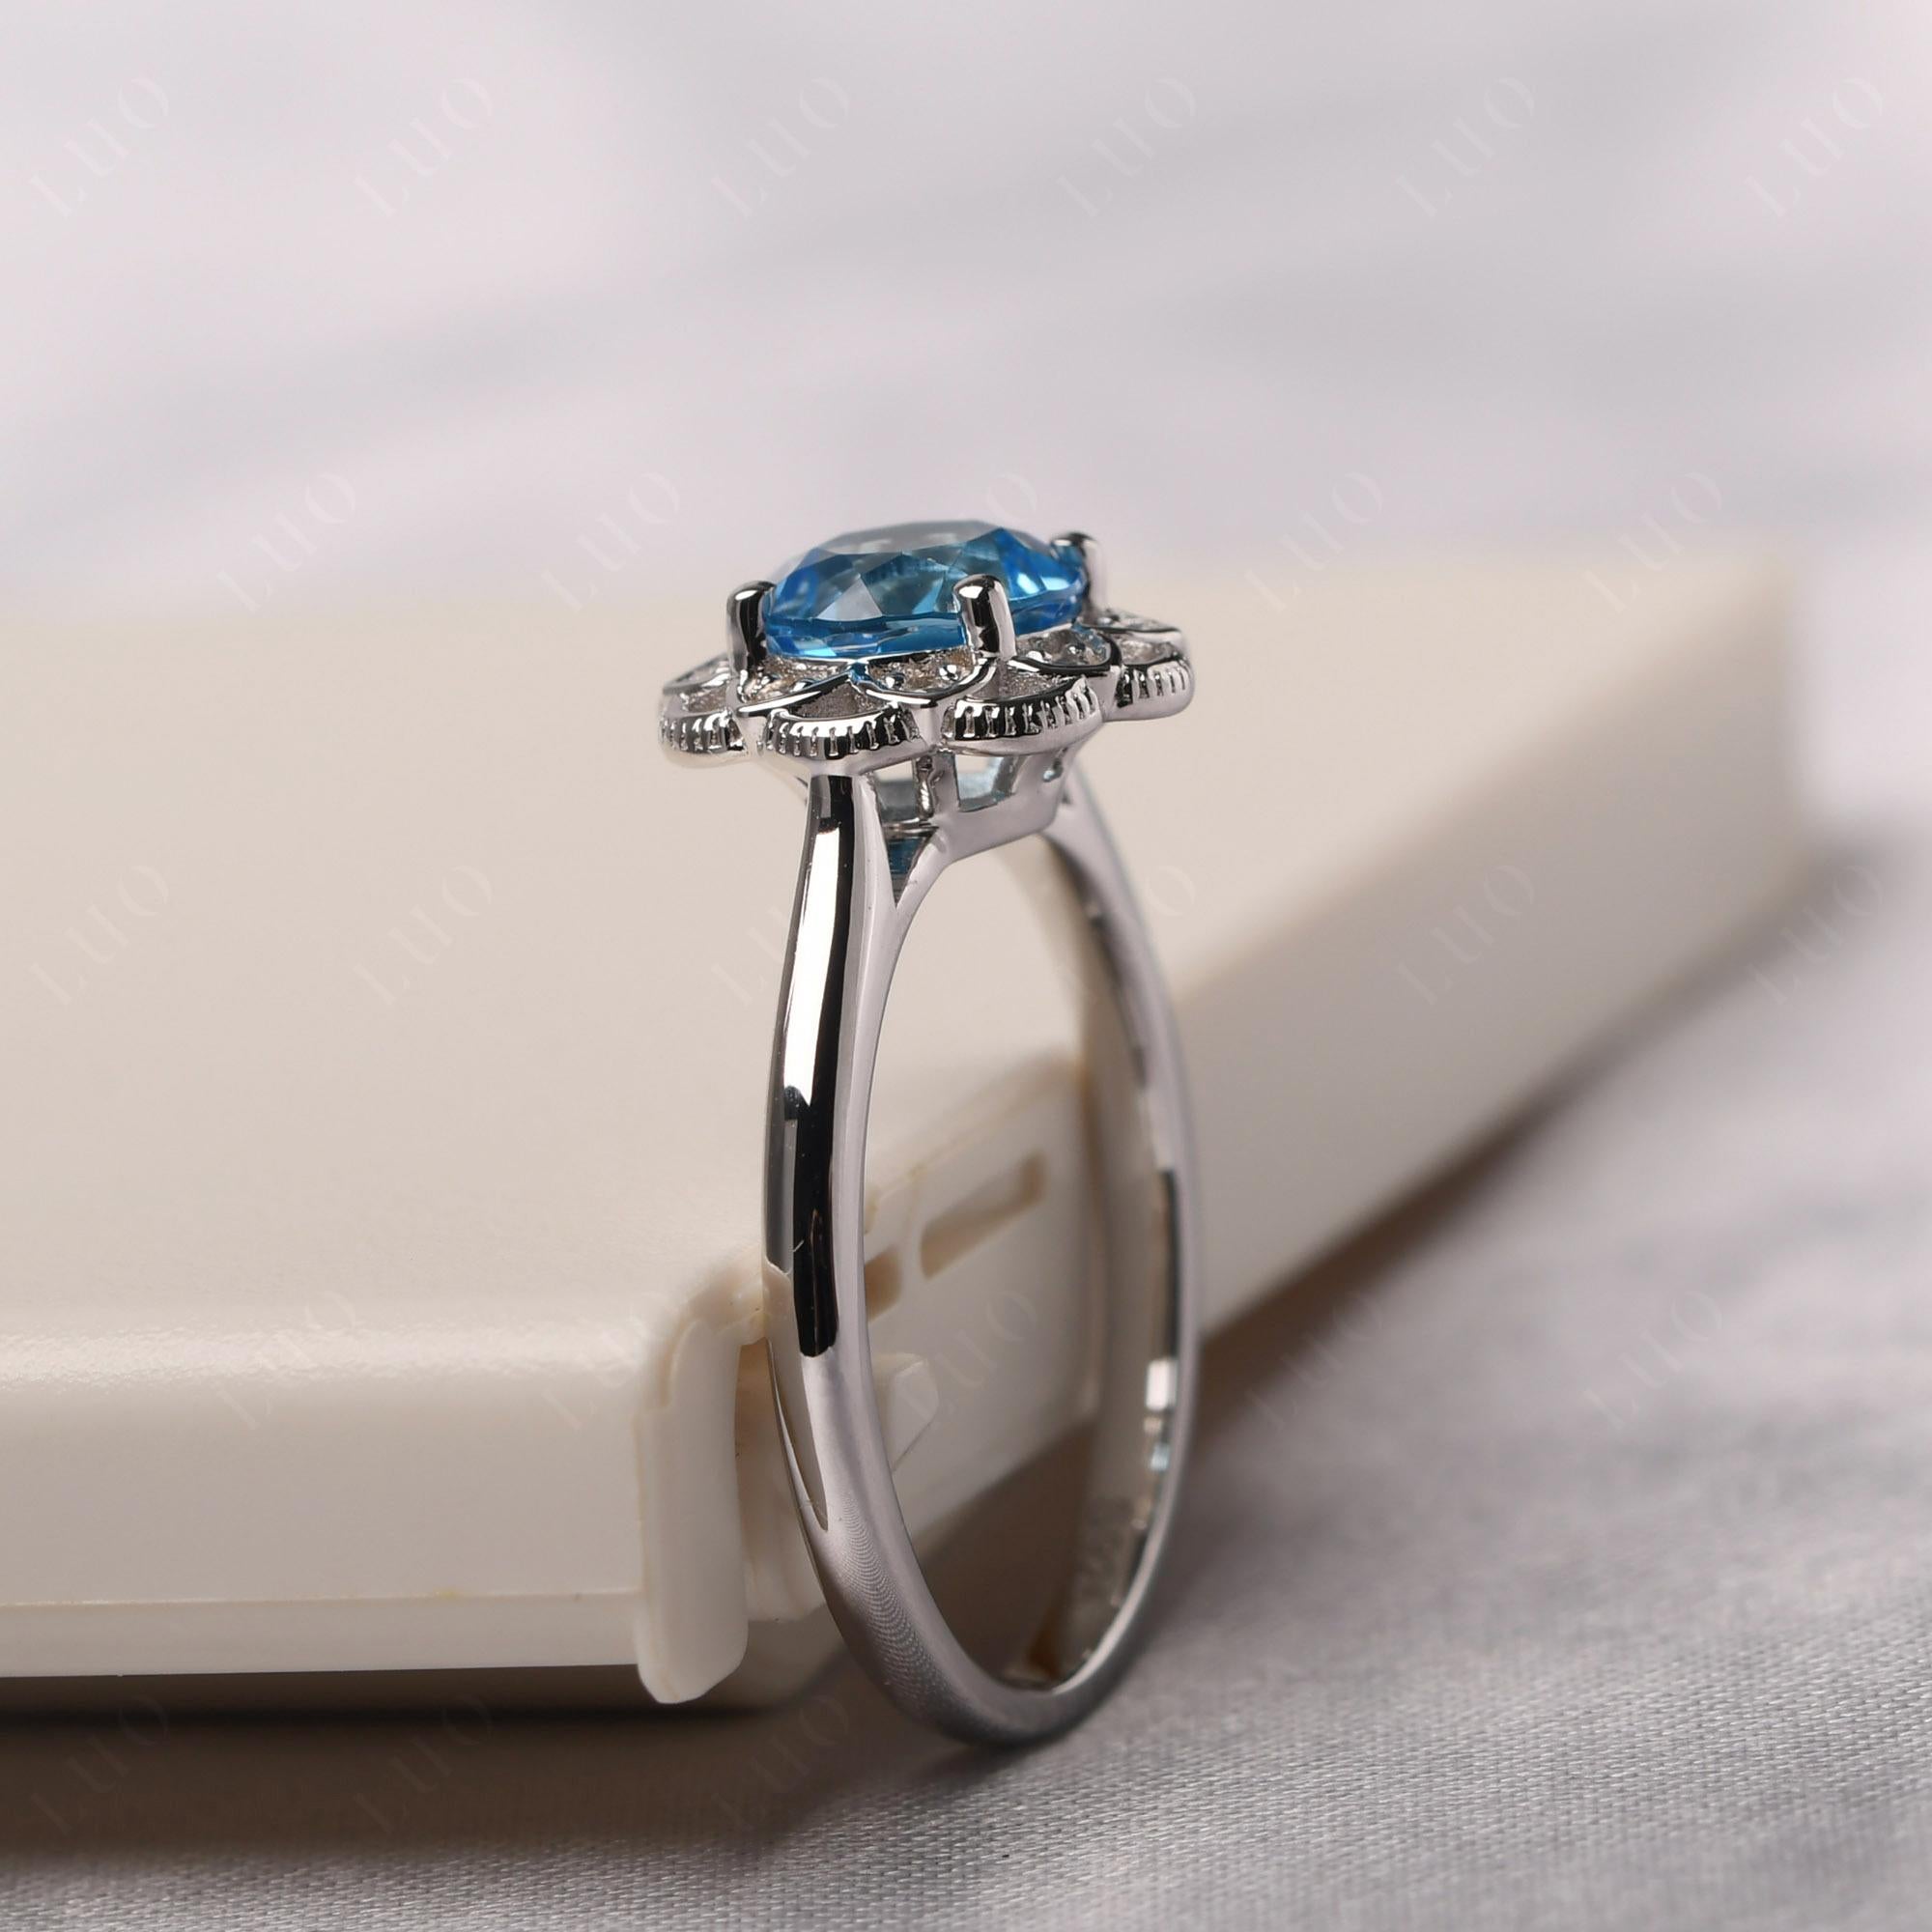 Swiss Blue Topaz Vintage Inspired Filigree Ring - LUO Jewelry